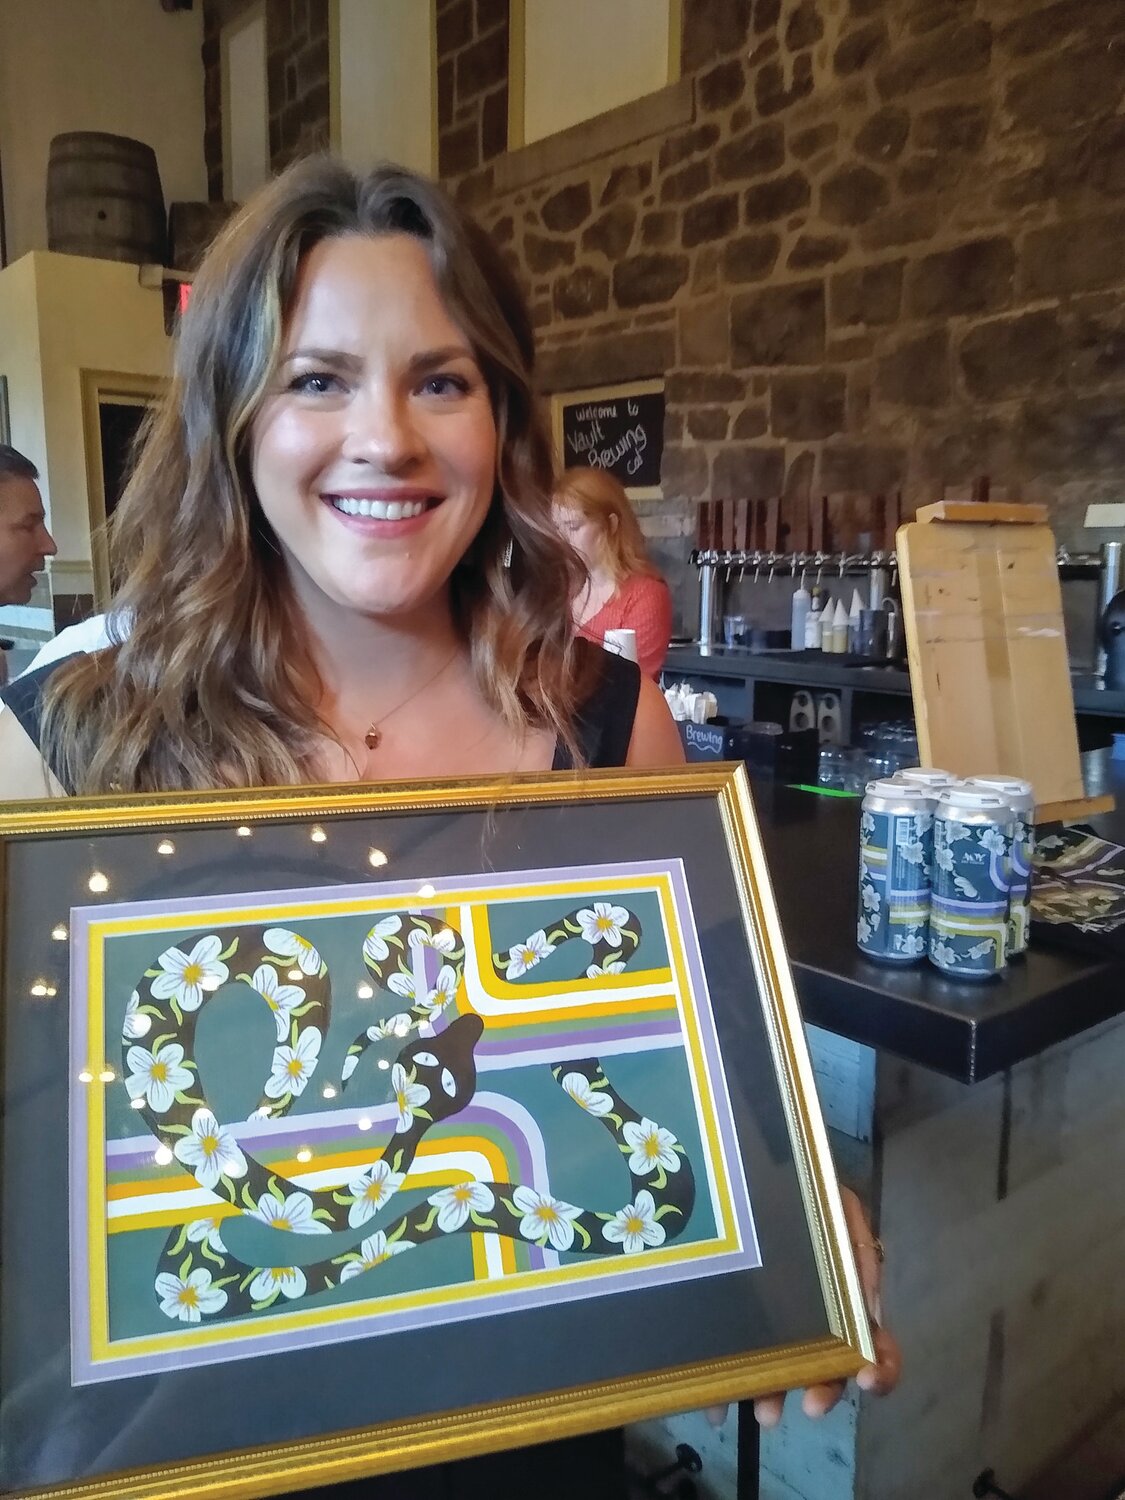 AOY Art Center member artist Amanda Brun of Yardley holds her winning entry, "Snake and Swirls," for the Craft Beer Can Design Contest for Vault Brewing’s limited edition of its Teller Pilsner.